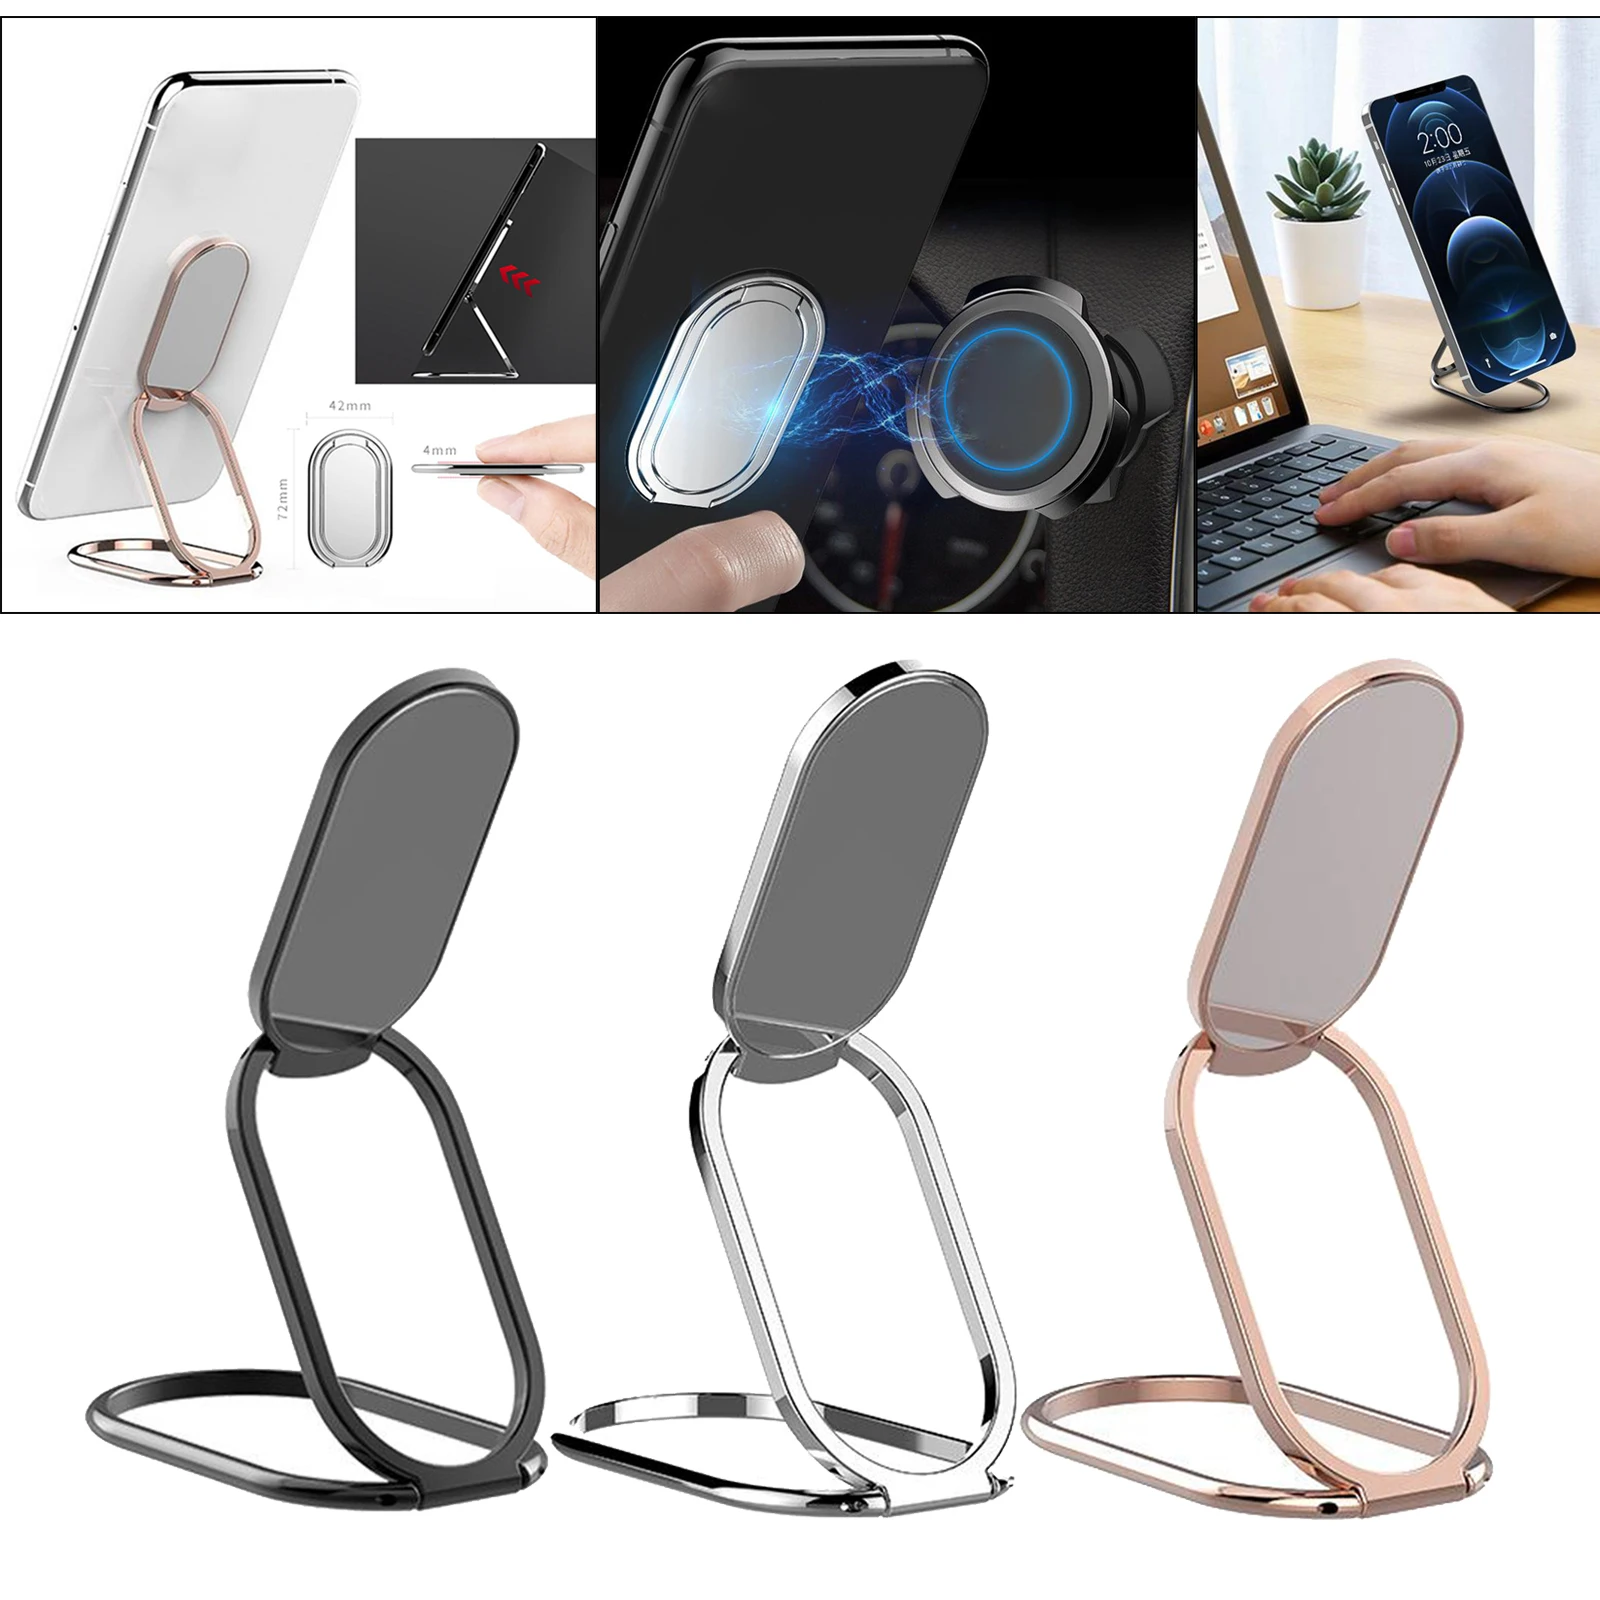 Ultra Thin Mobile Folding Stand